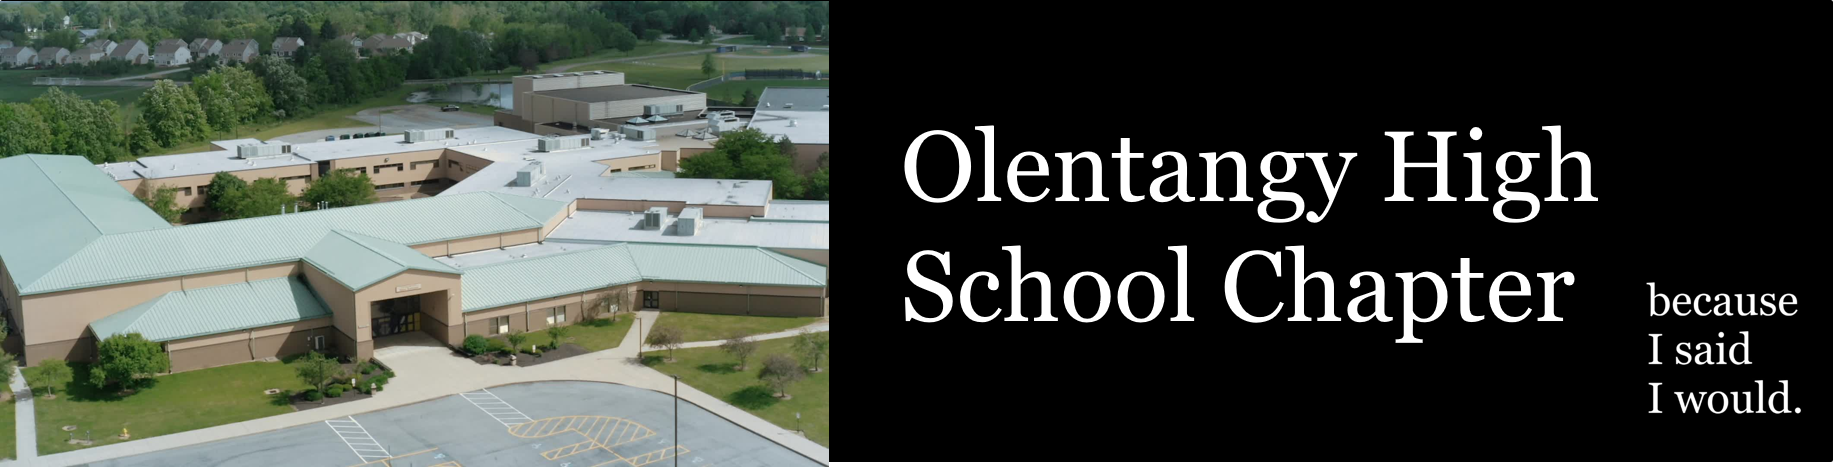 Olentangy High School - because I said I would.